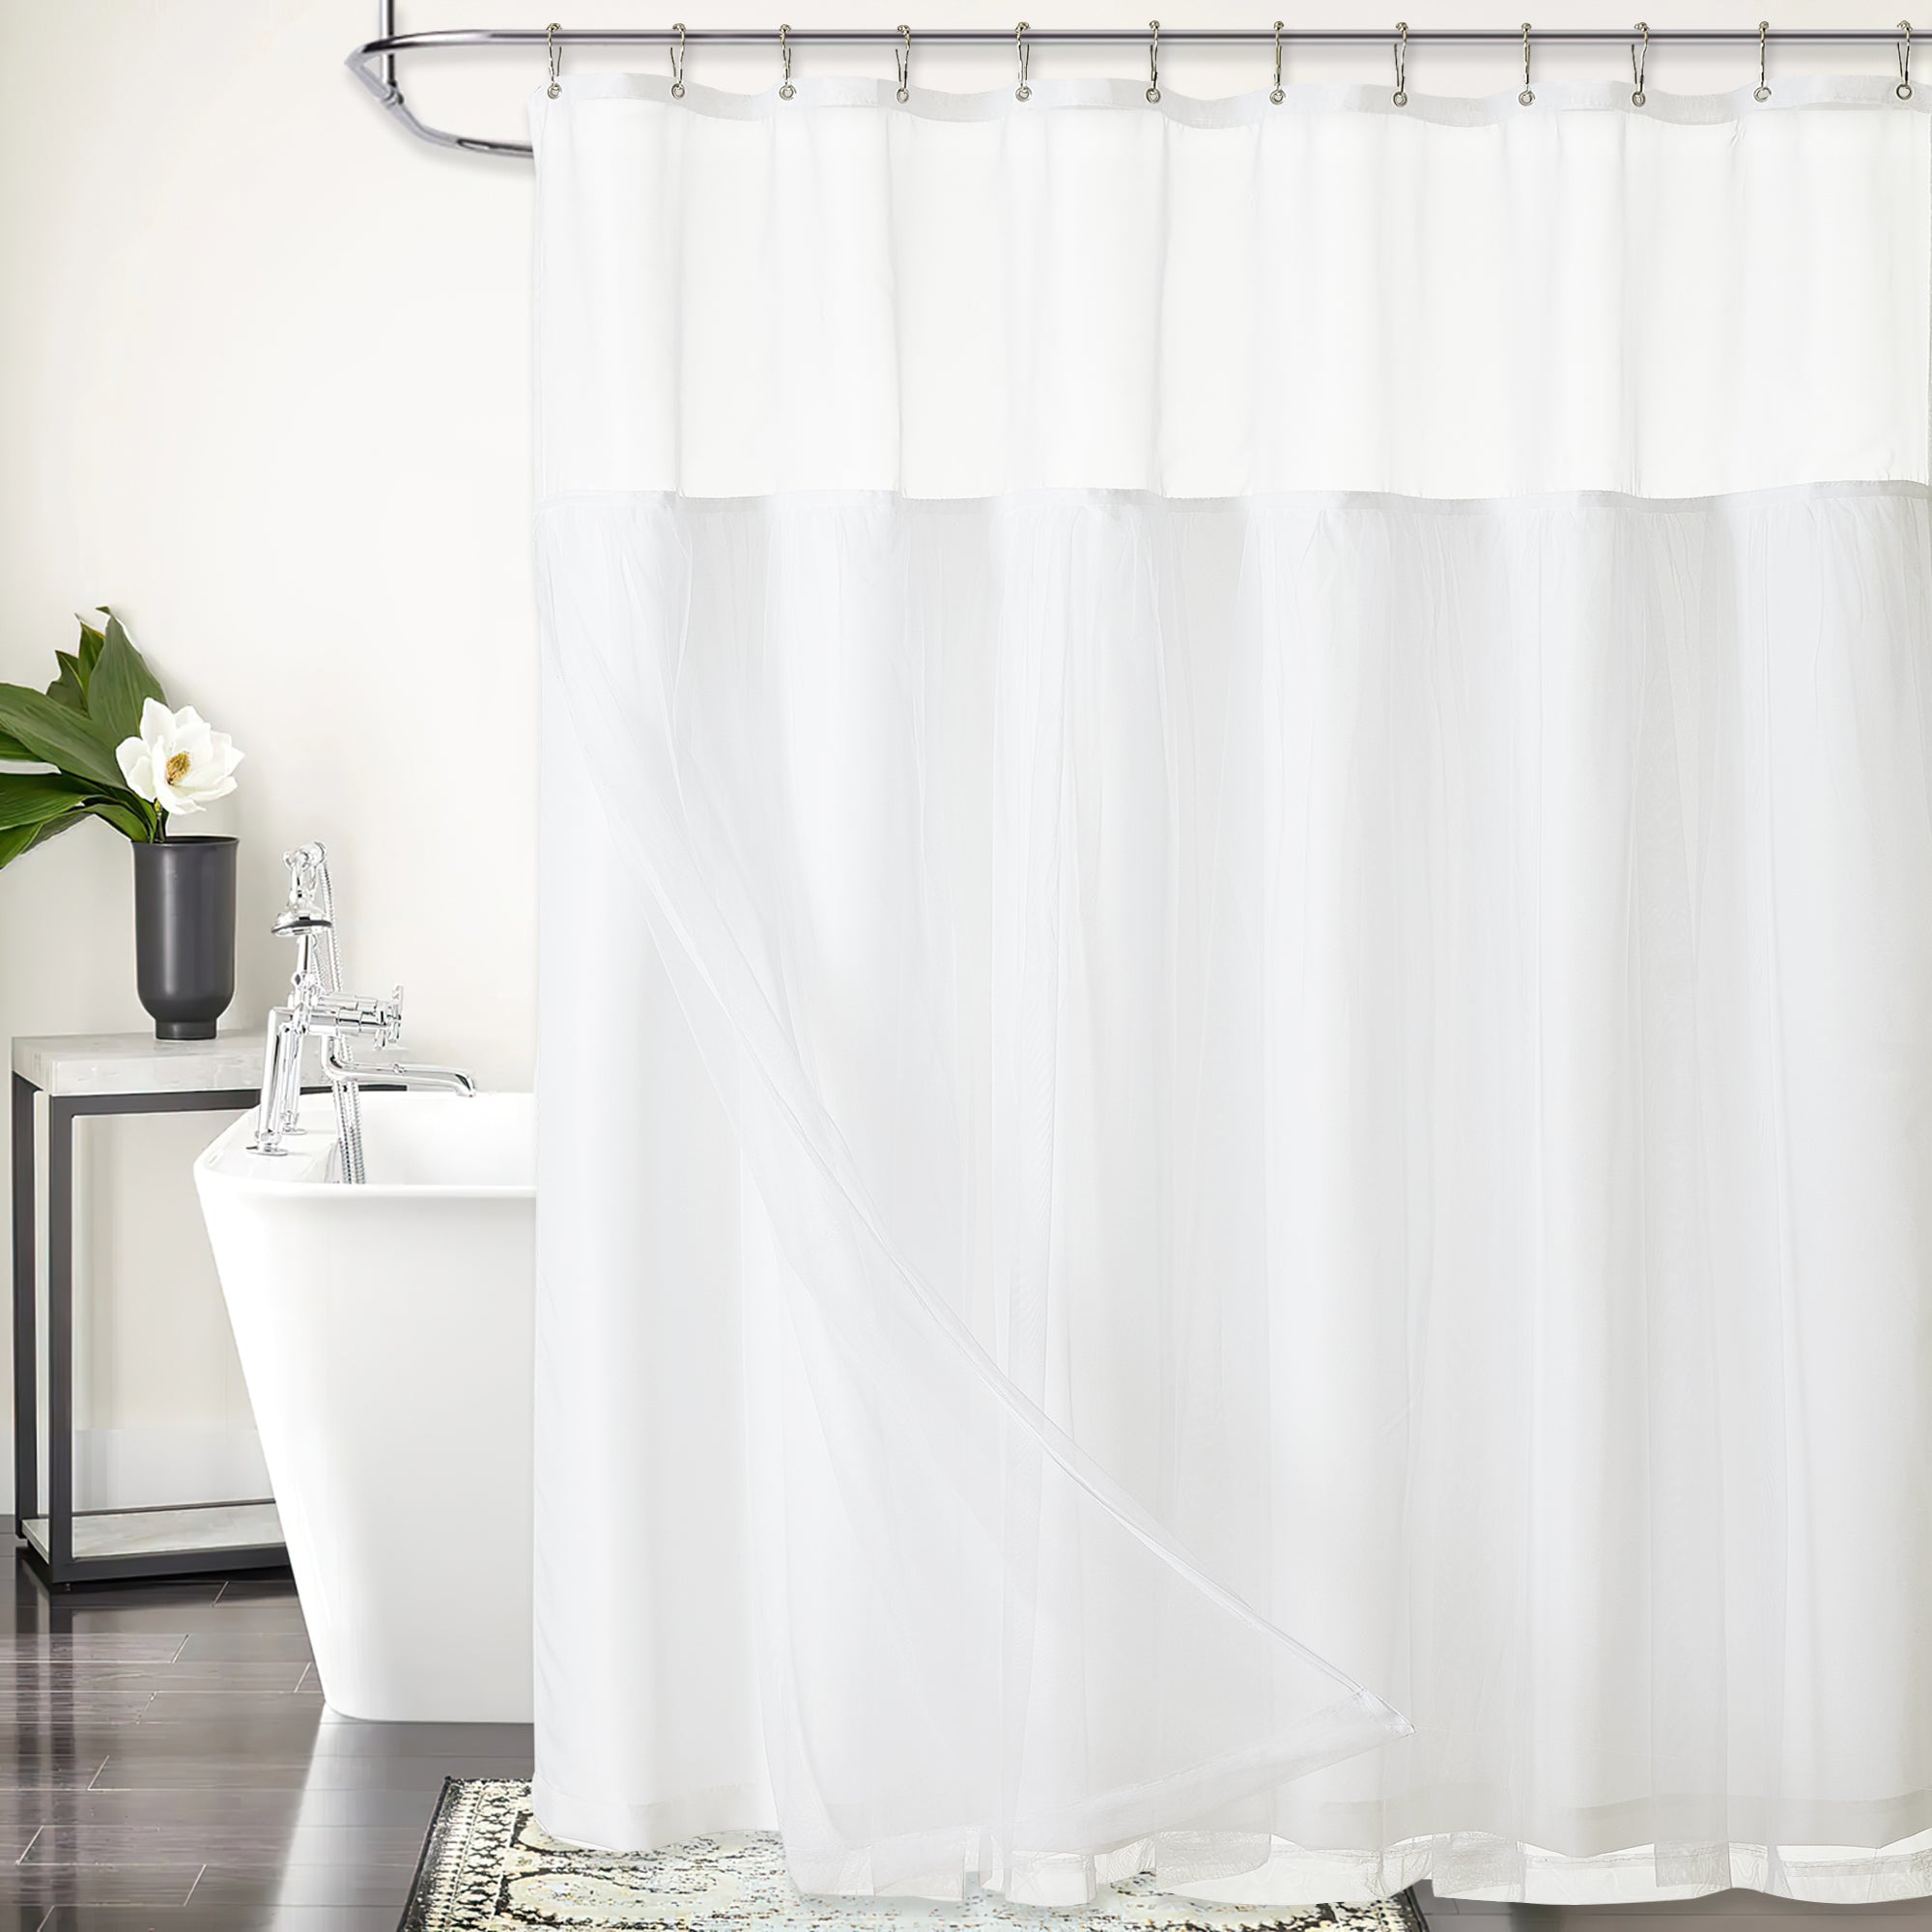 Triple Layer Sheer Pleated Tulle And Waterproof Polyester Shower Curtains 1 Panel With 12 Hooks KGORGE Store